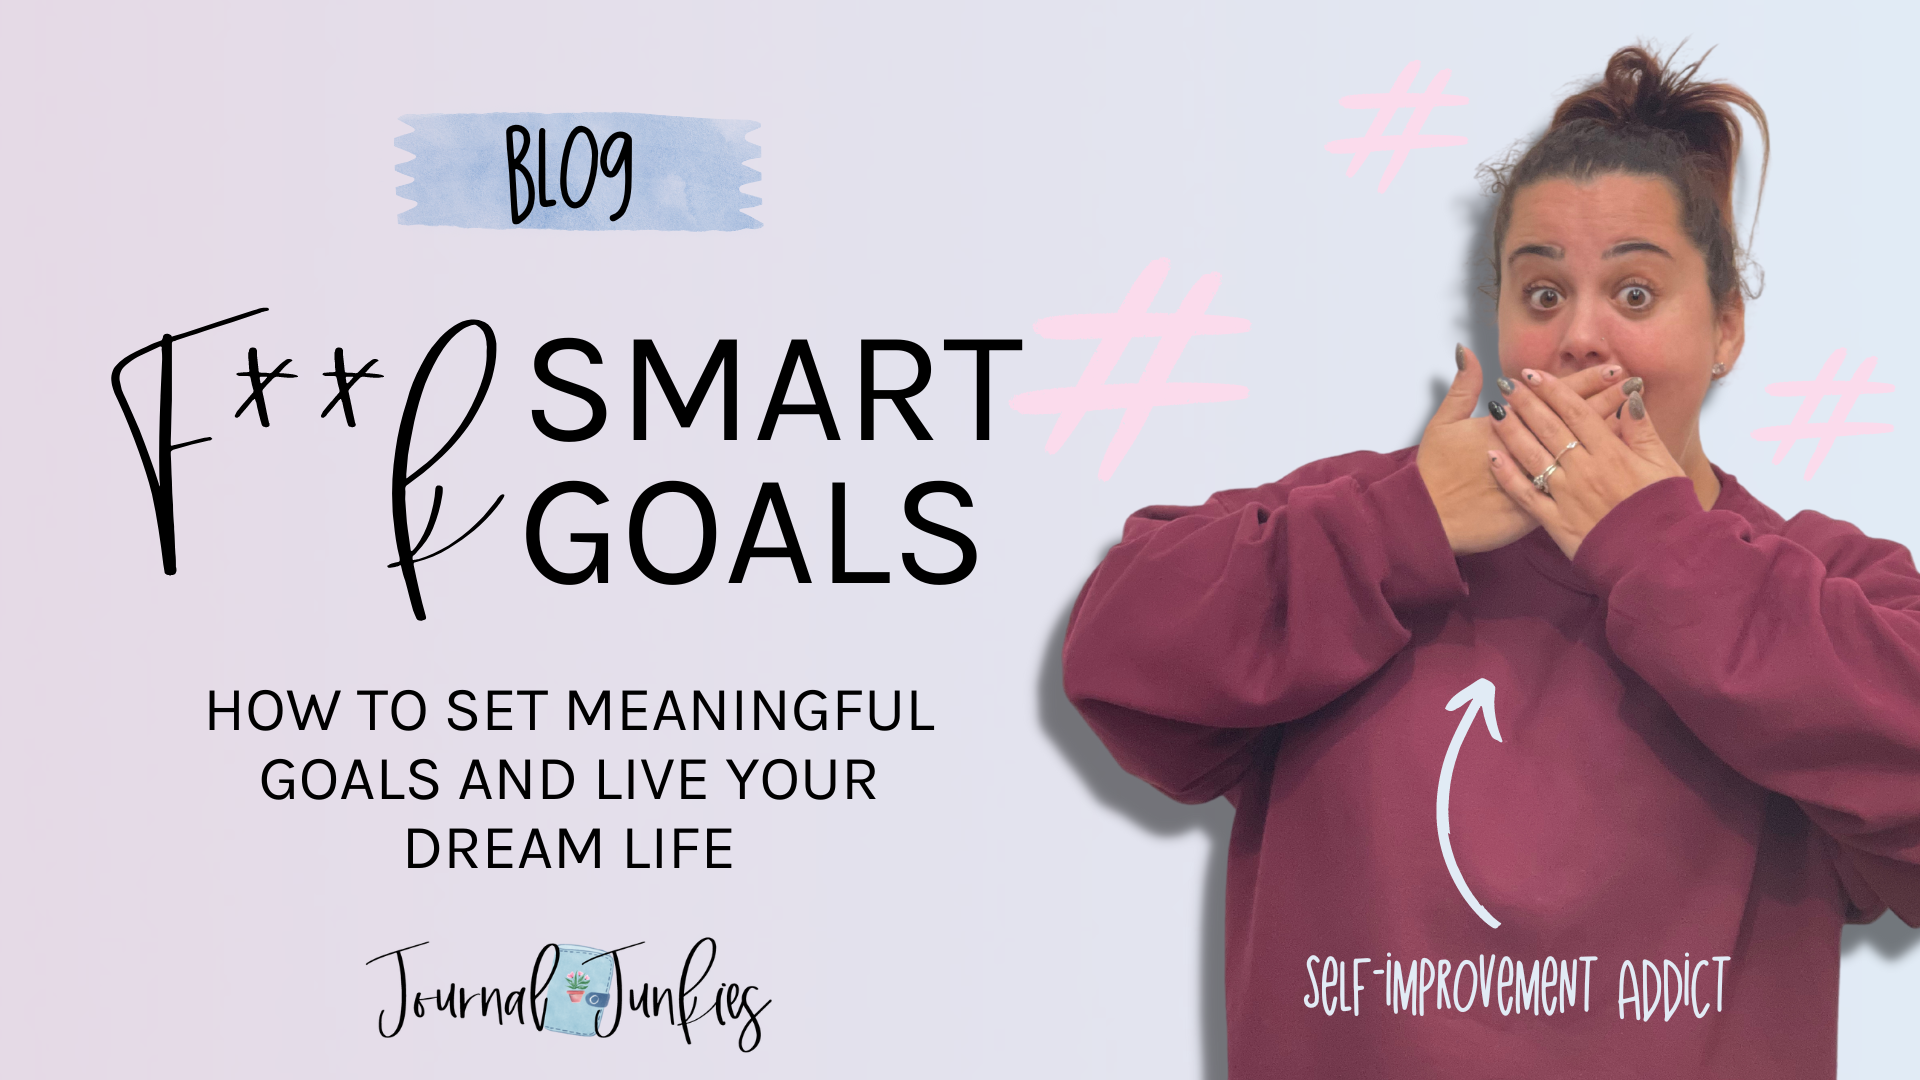 Fuck SMART goals: How to Set Meaningful Goals and Live Your Dream Life